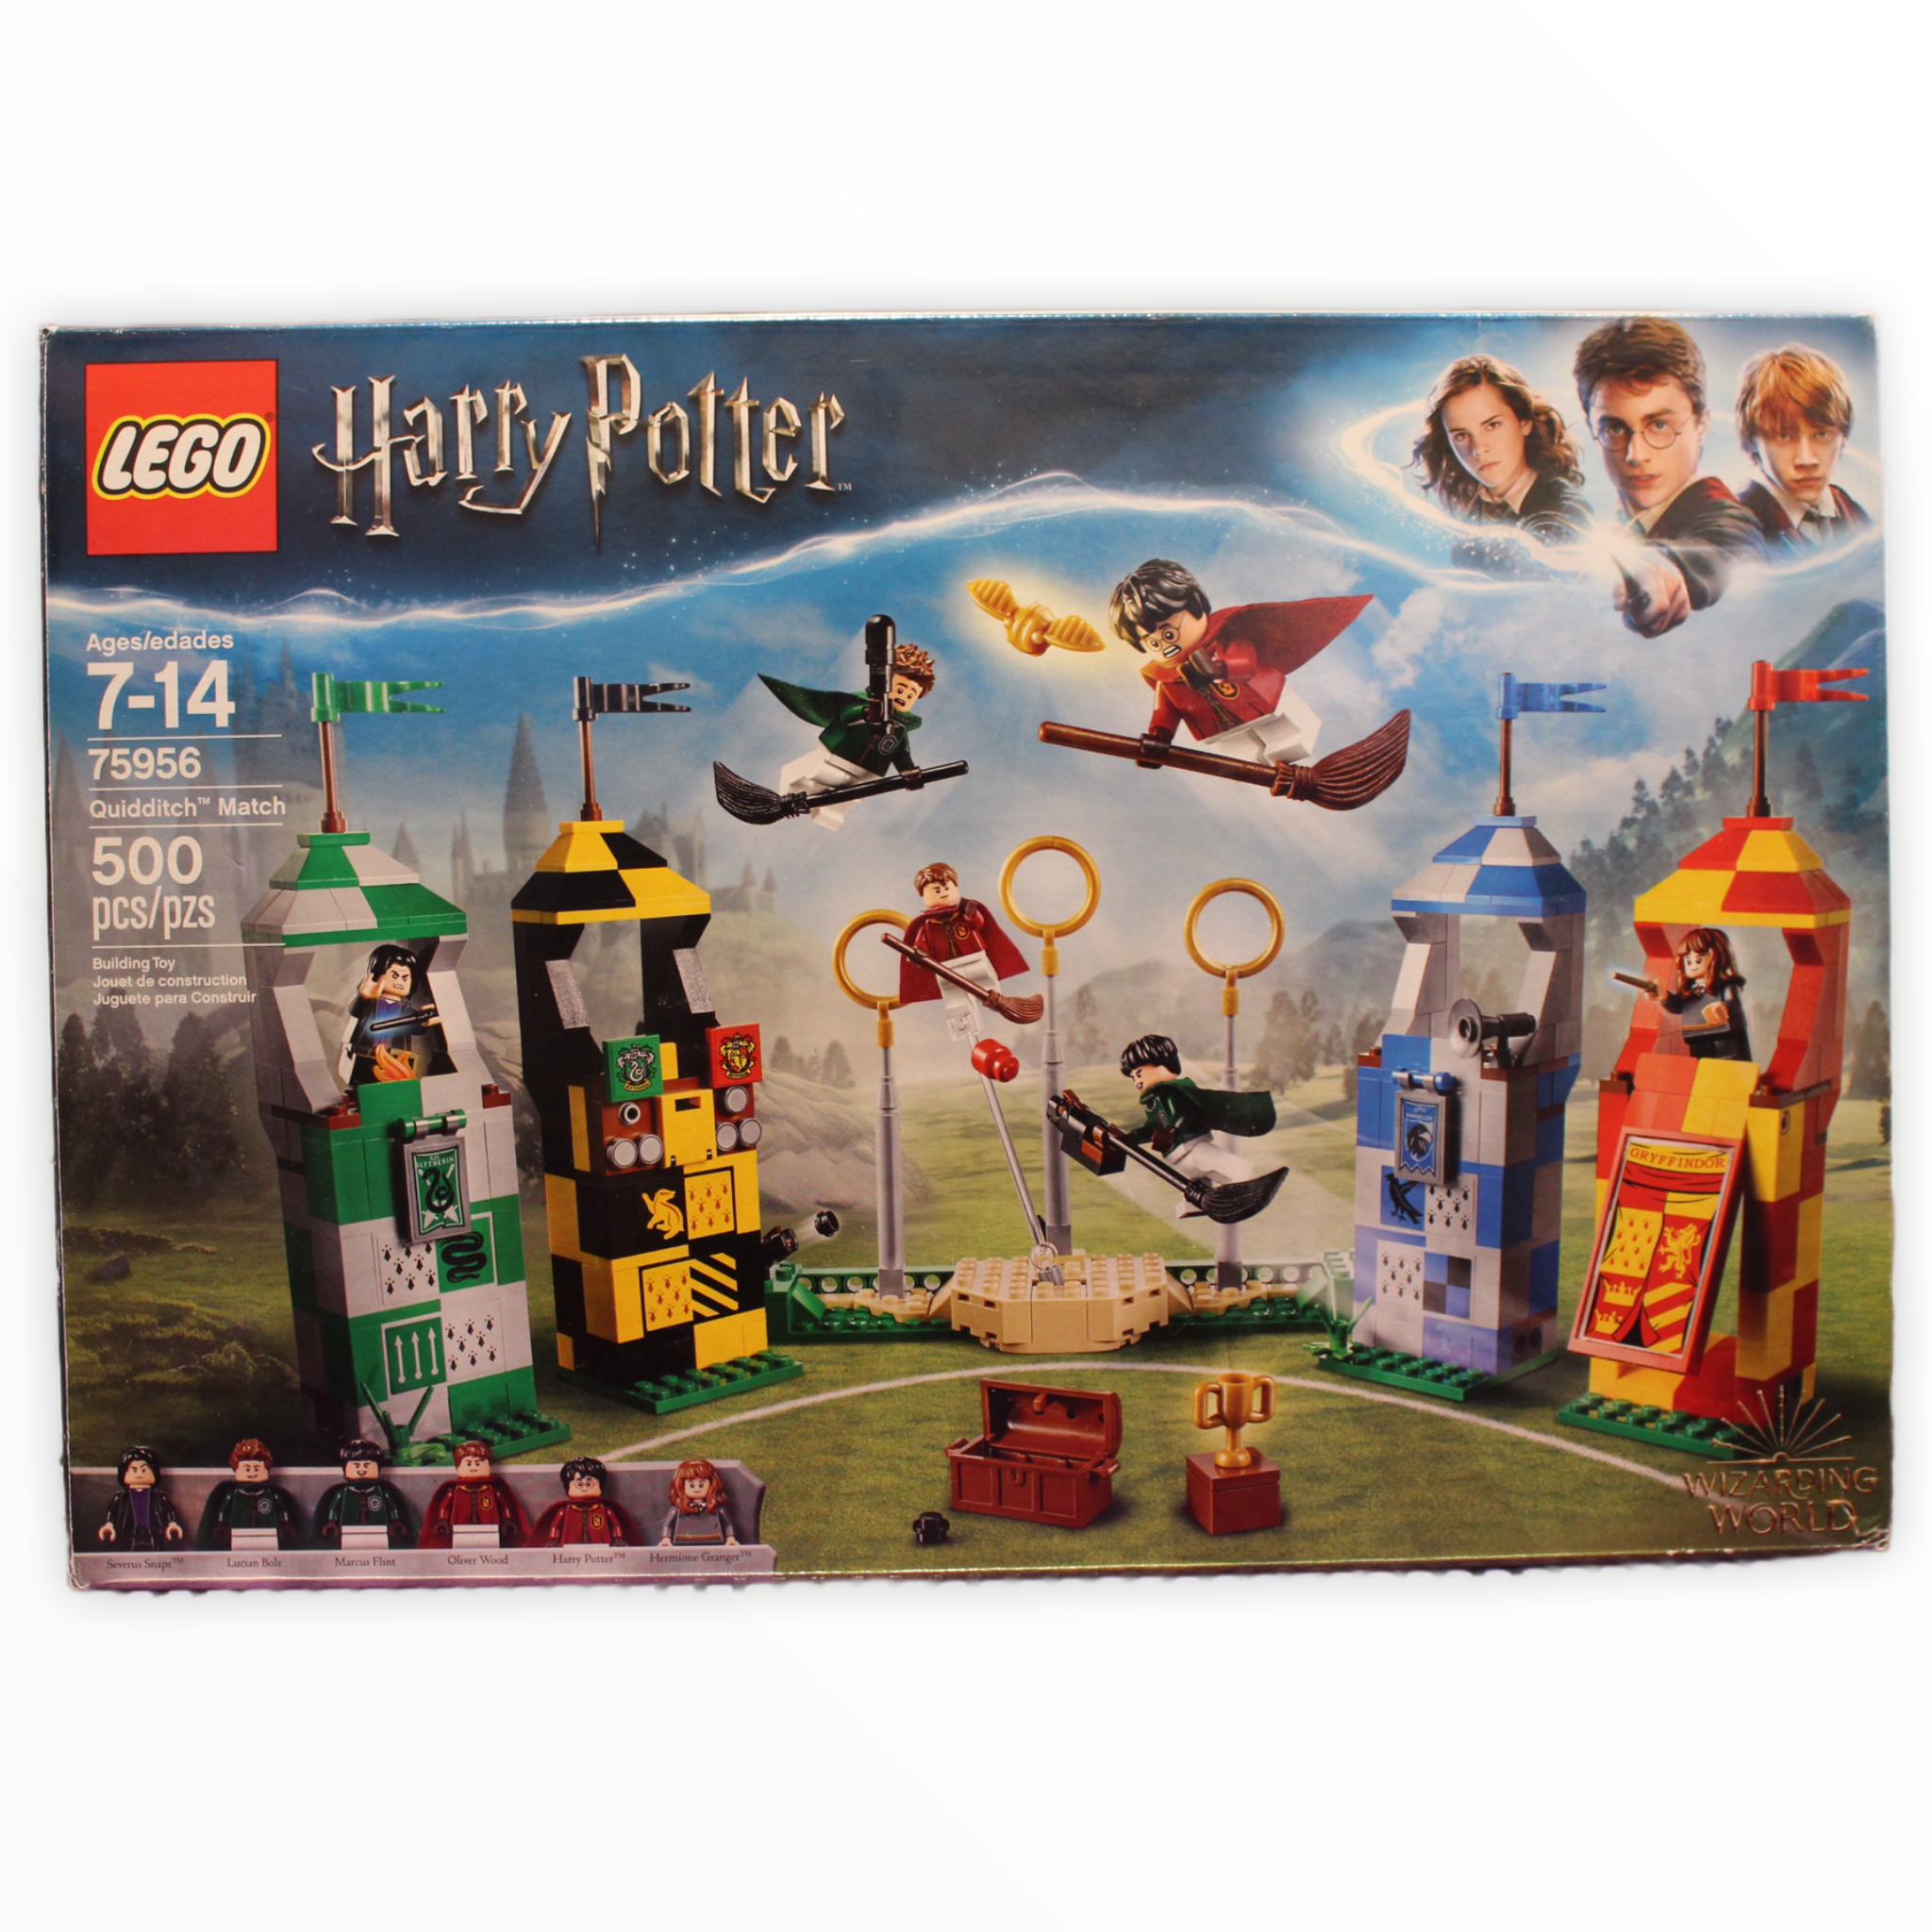 Certified Used Set 75956 Harry Potter Quidditch Match